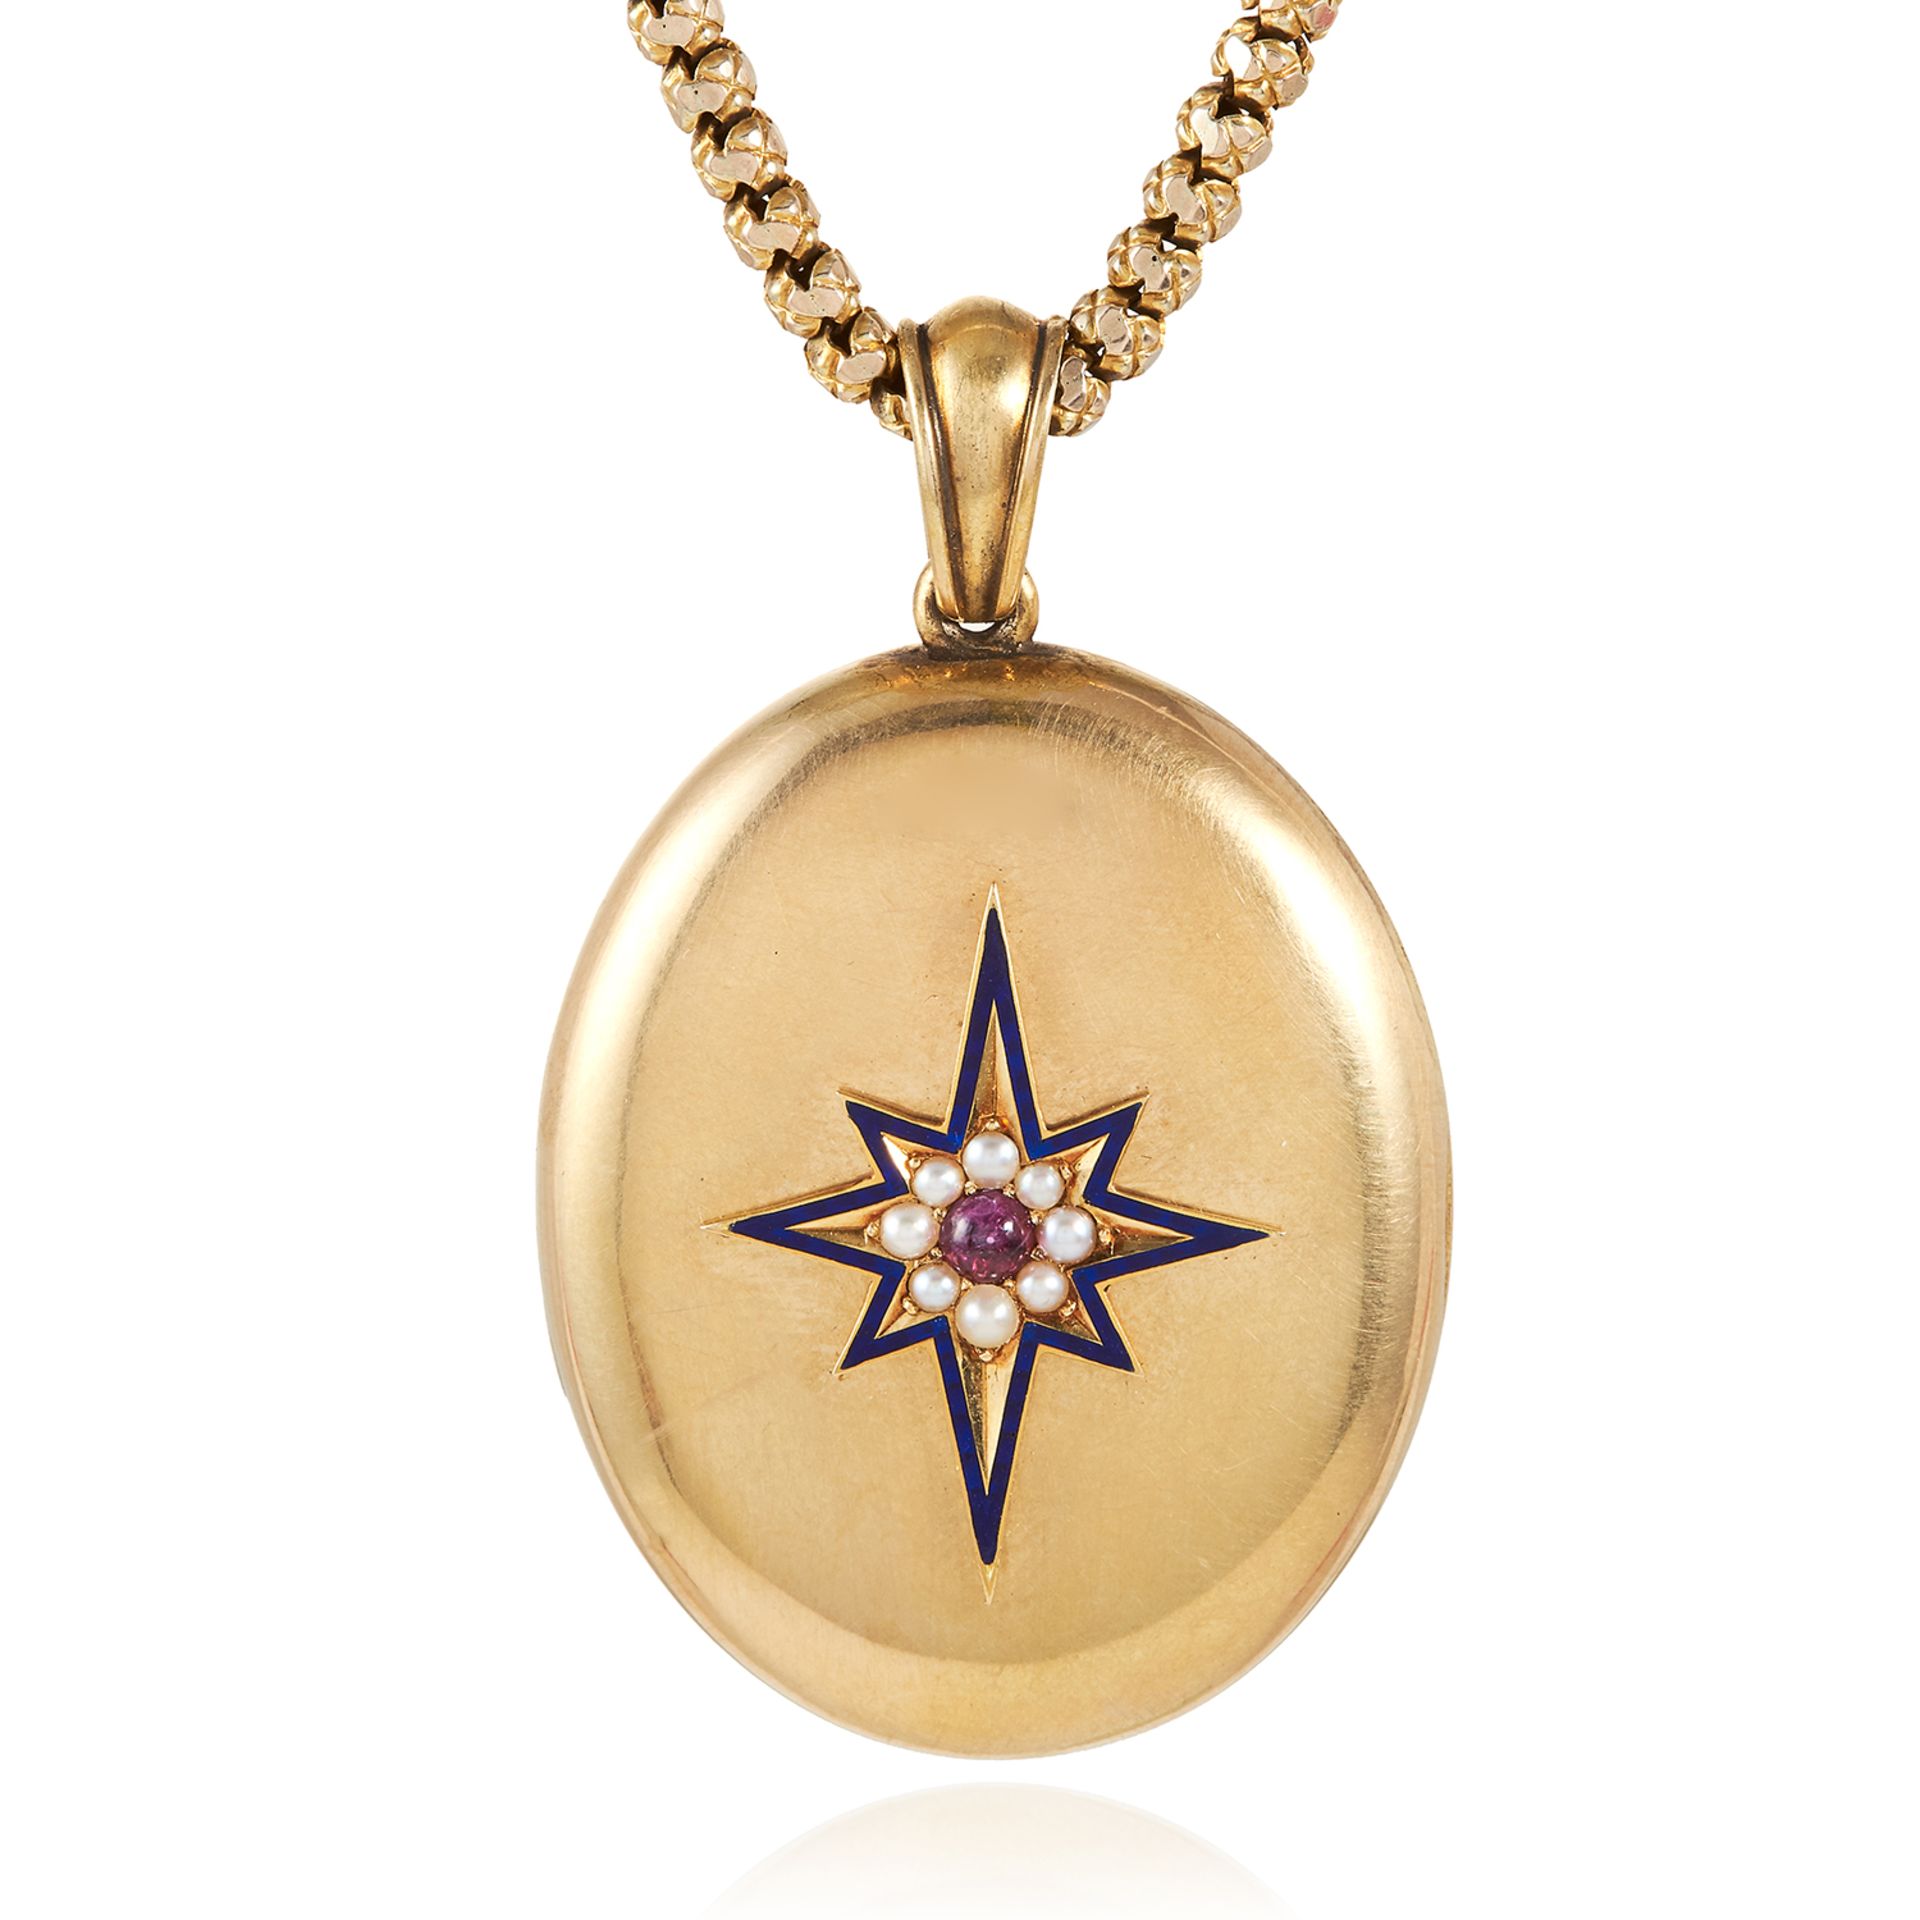 AN ANTIQUE GARNET, PEARL AND ENAMEL LOCKET in high carat yellow gold, set with a cabochon garnet,